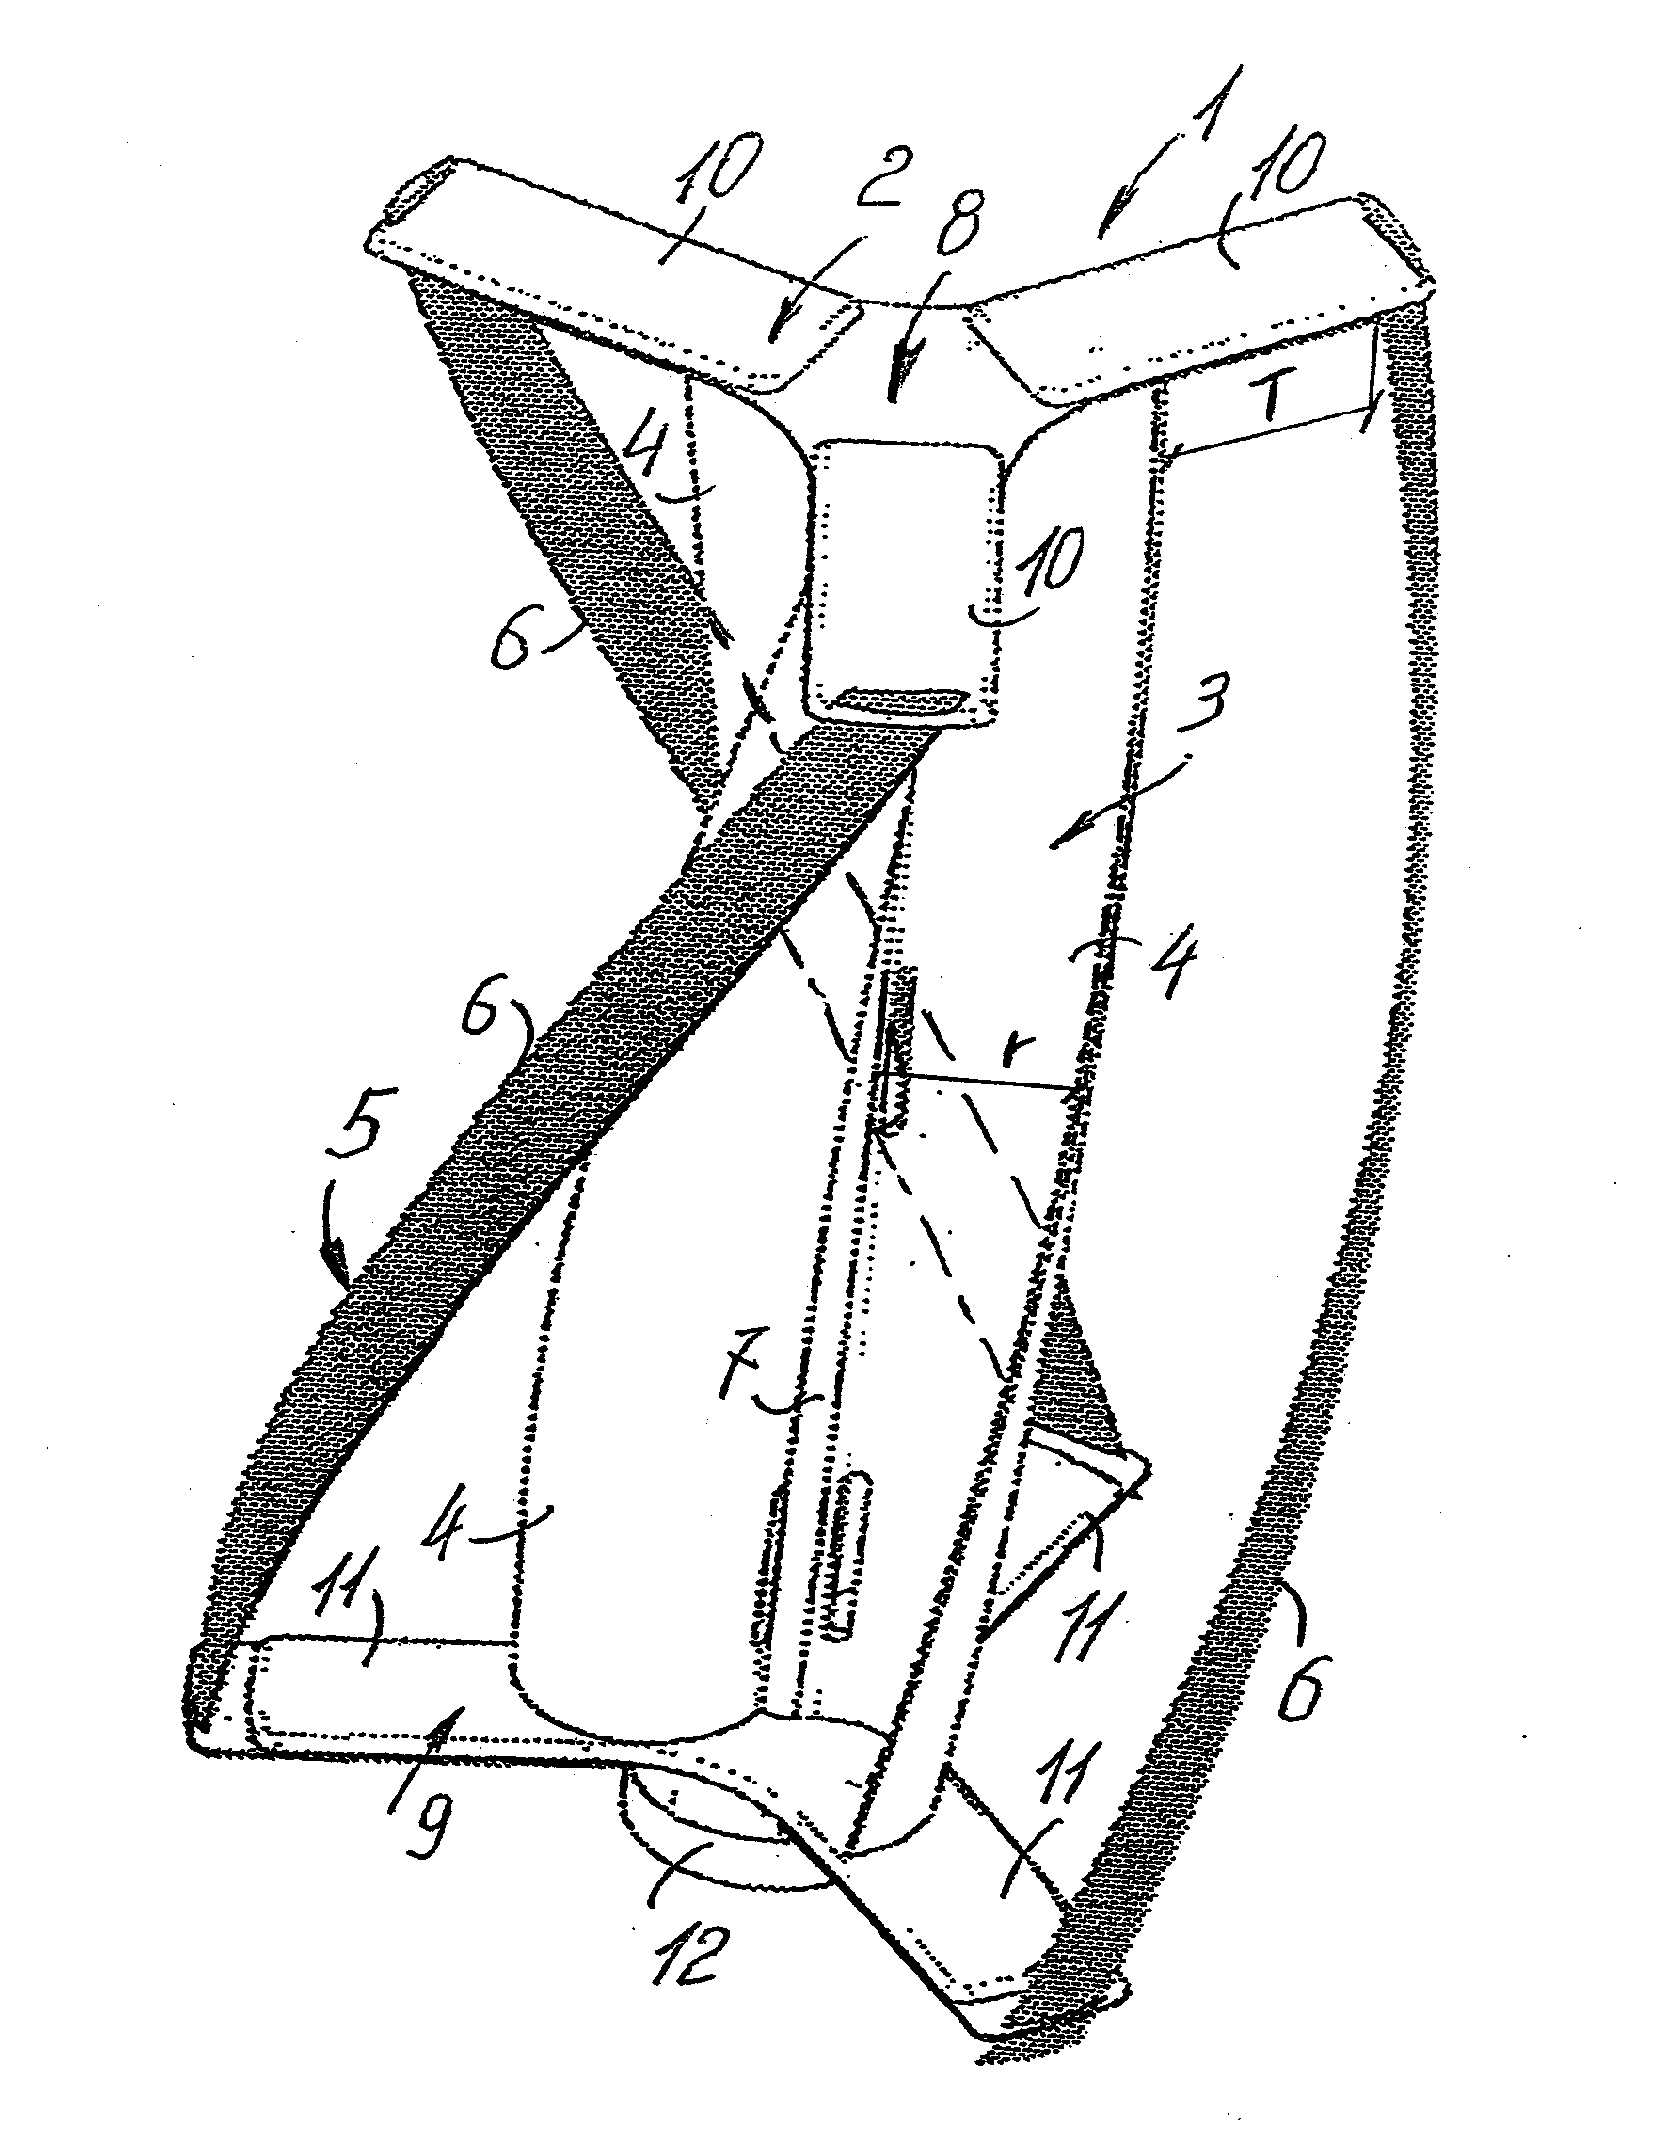 Hybrid type vertical shaft turbine for wind power generating devices